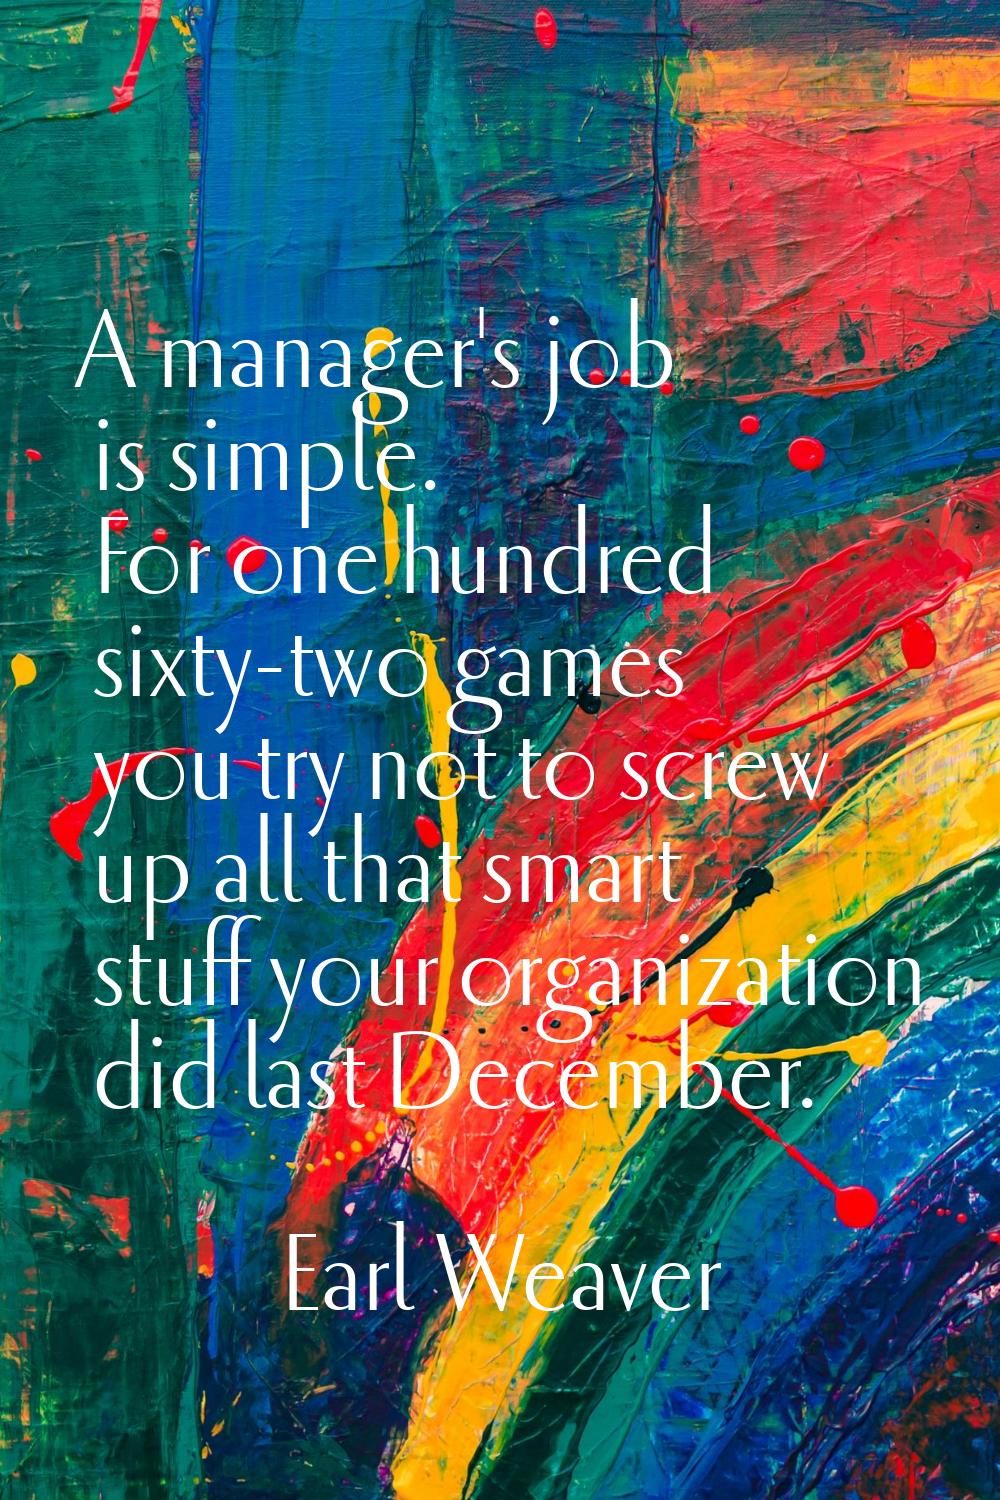 A manager's job is simple. For one hundred sixty-two games you try not to screw up all that smart s